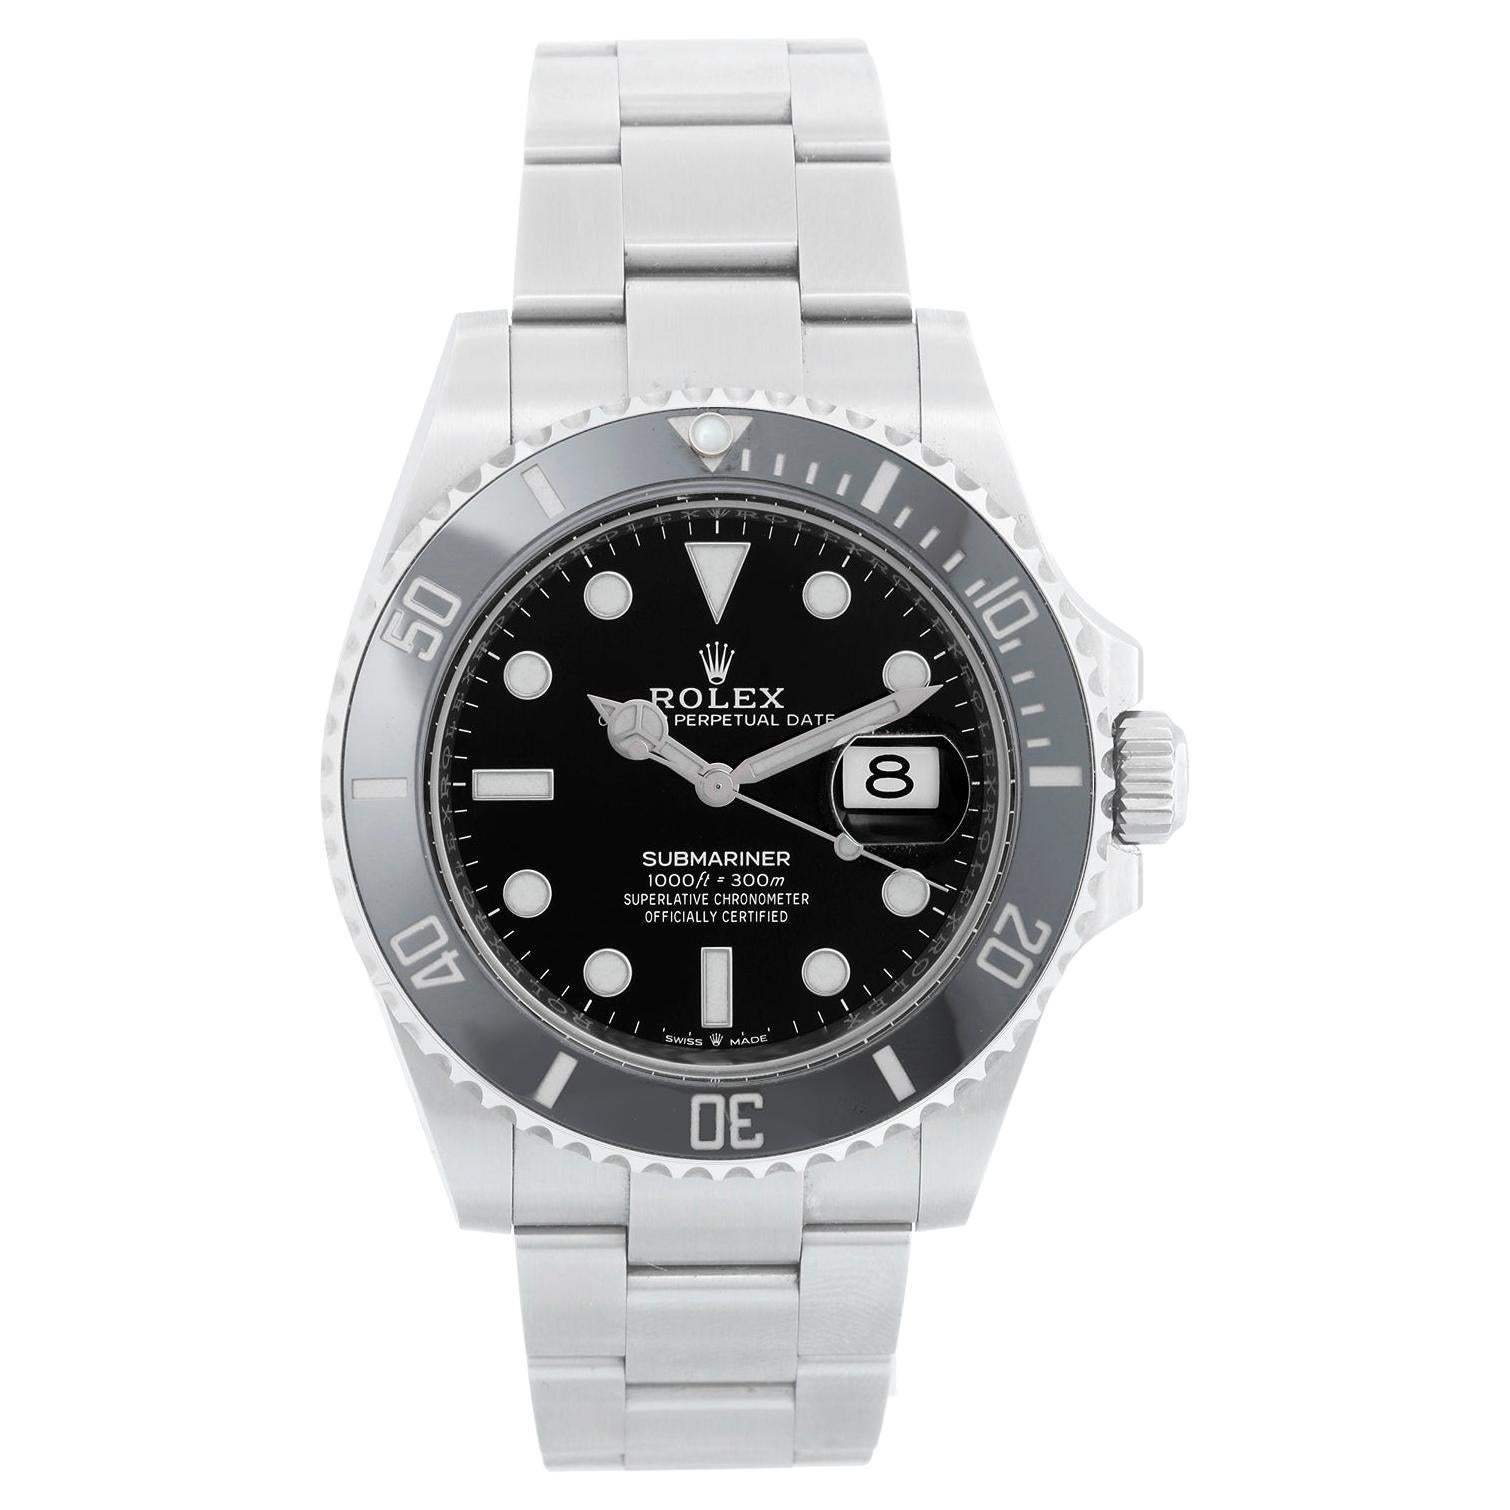 Rolex Submariner Date Men's Stainless Steel Watch 126610LN For Sale